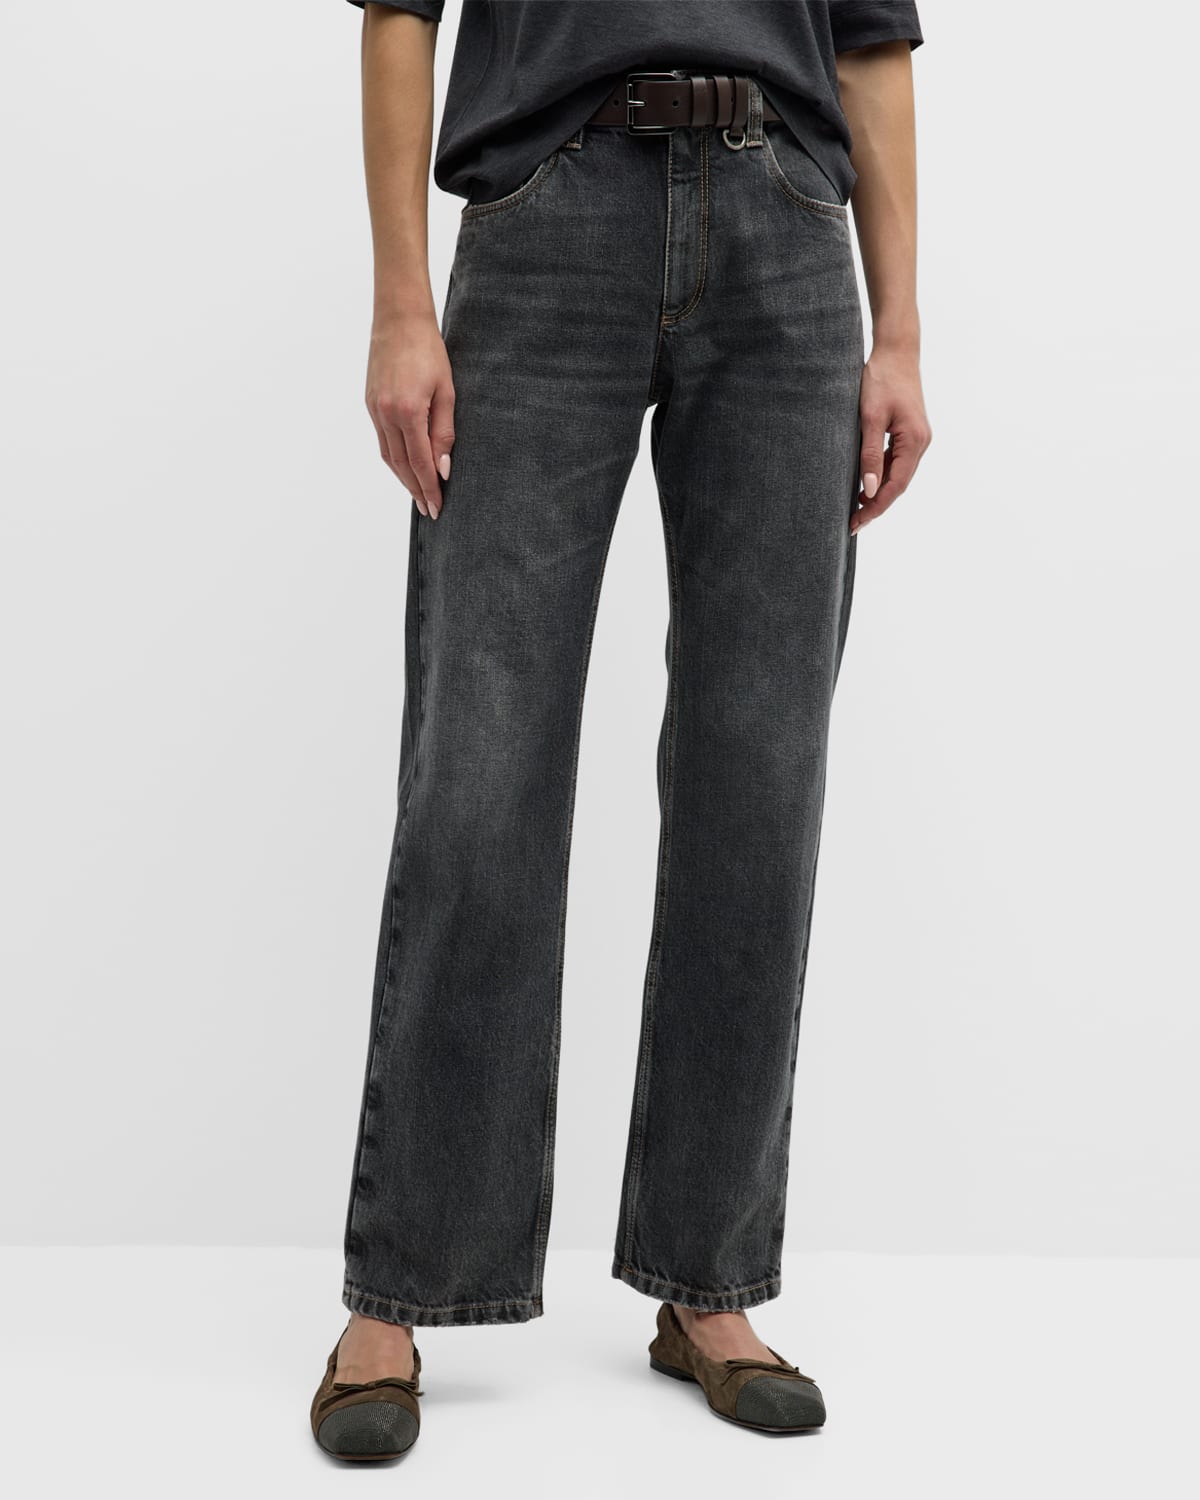 BRUNELLO CUCINELLI RETRO VINTAGE RELAXED JEANS